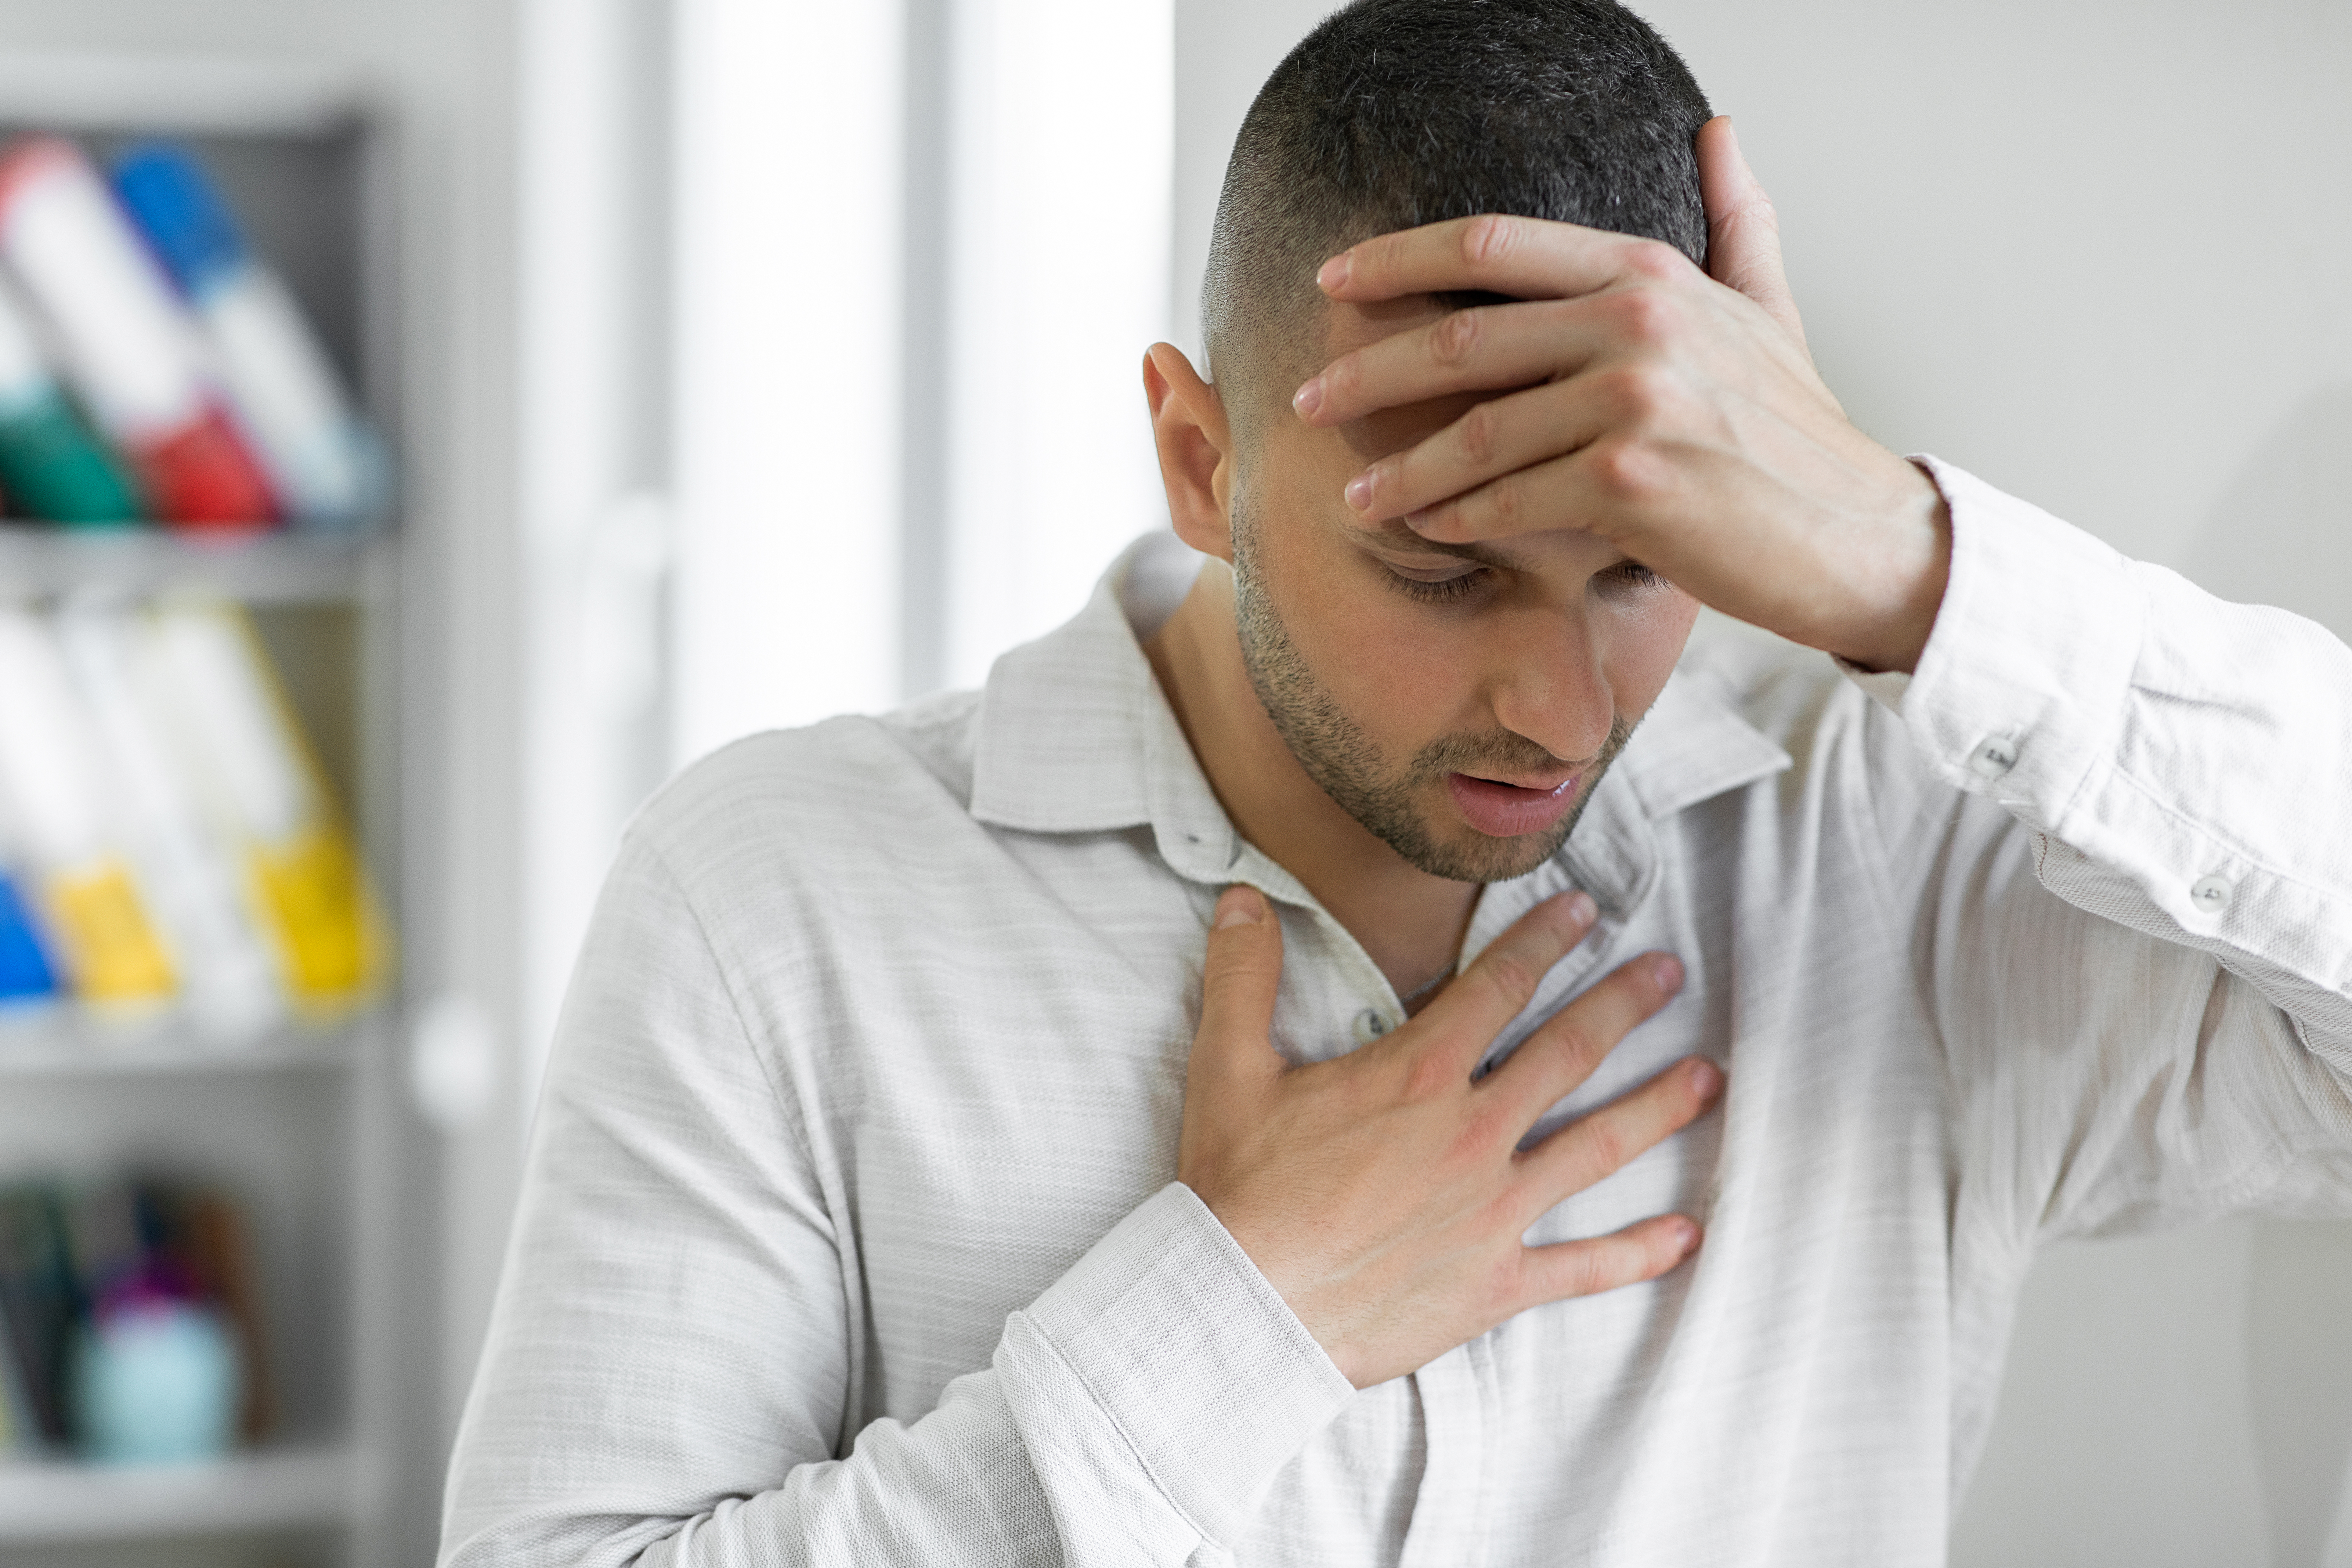 Man suffering from breathing problem | Source: Getty Images